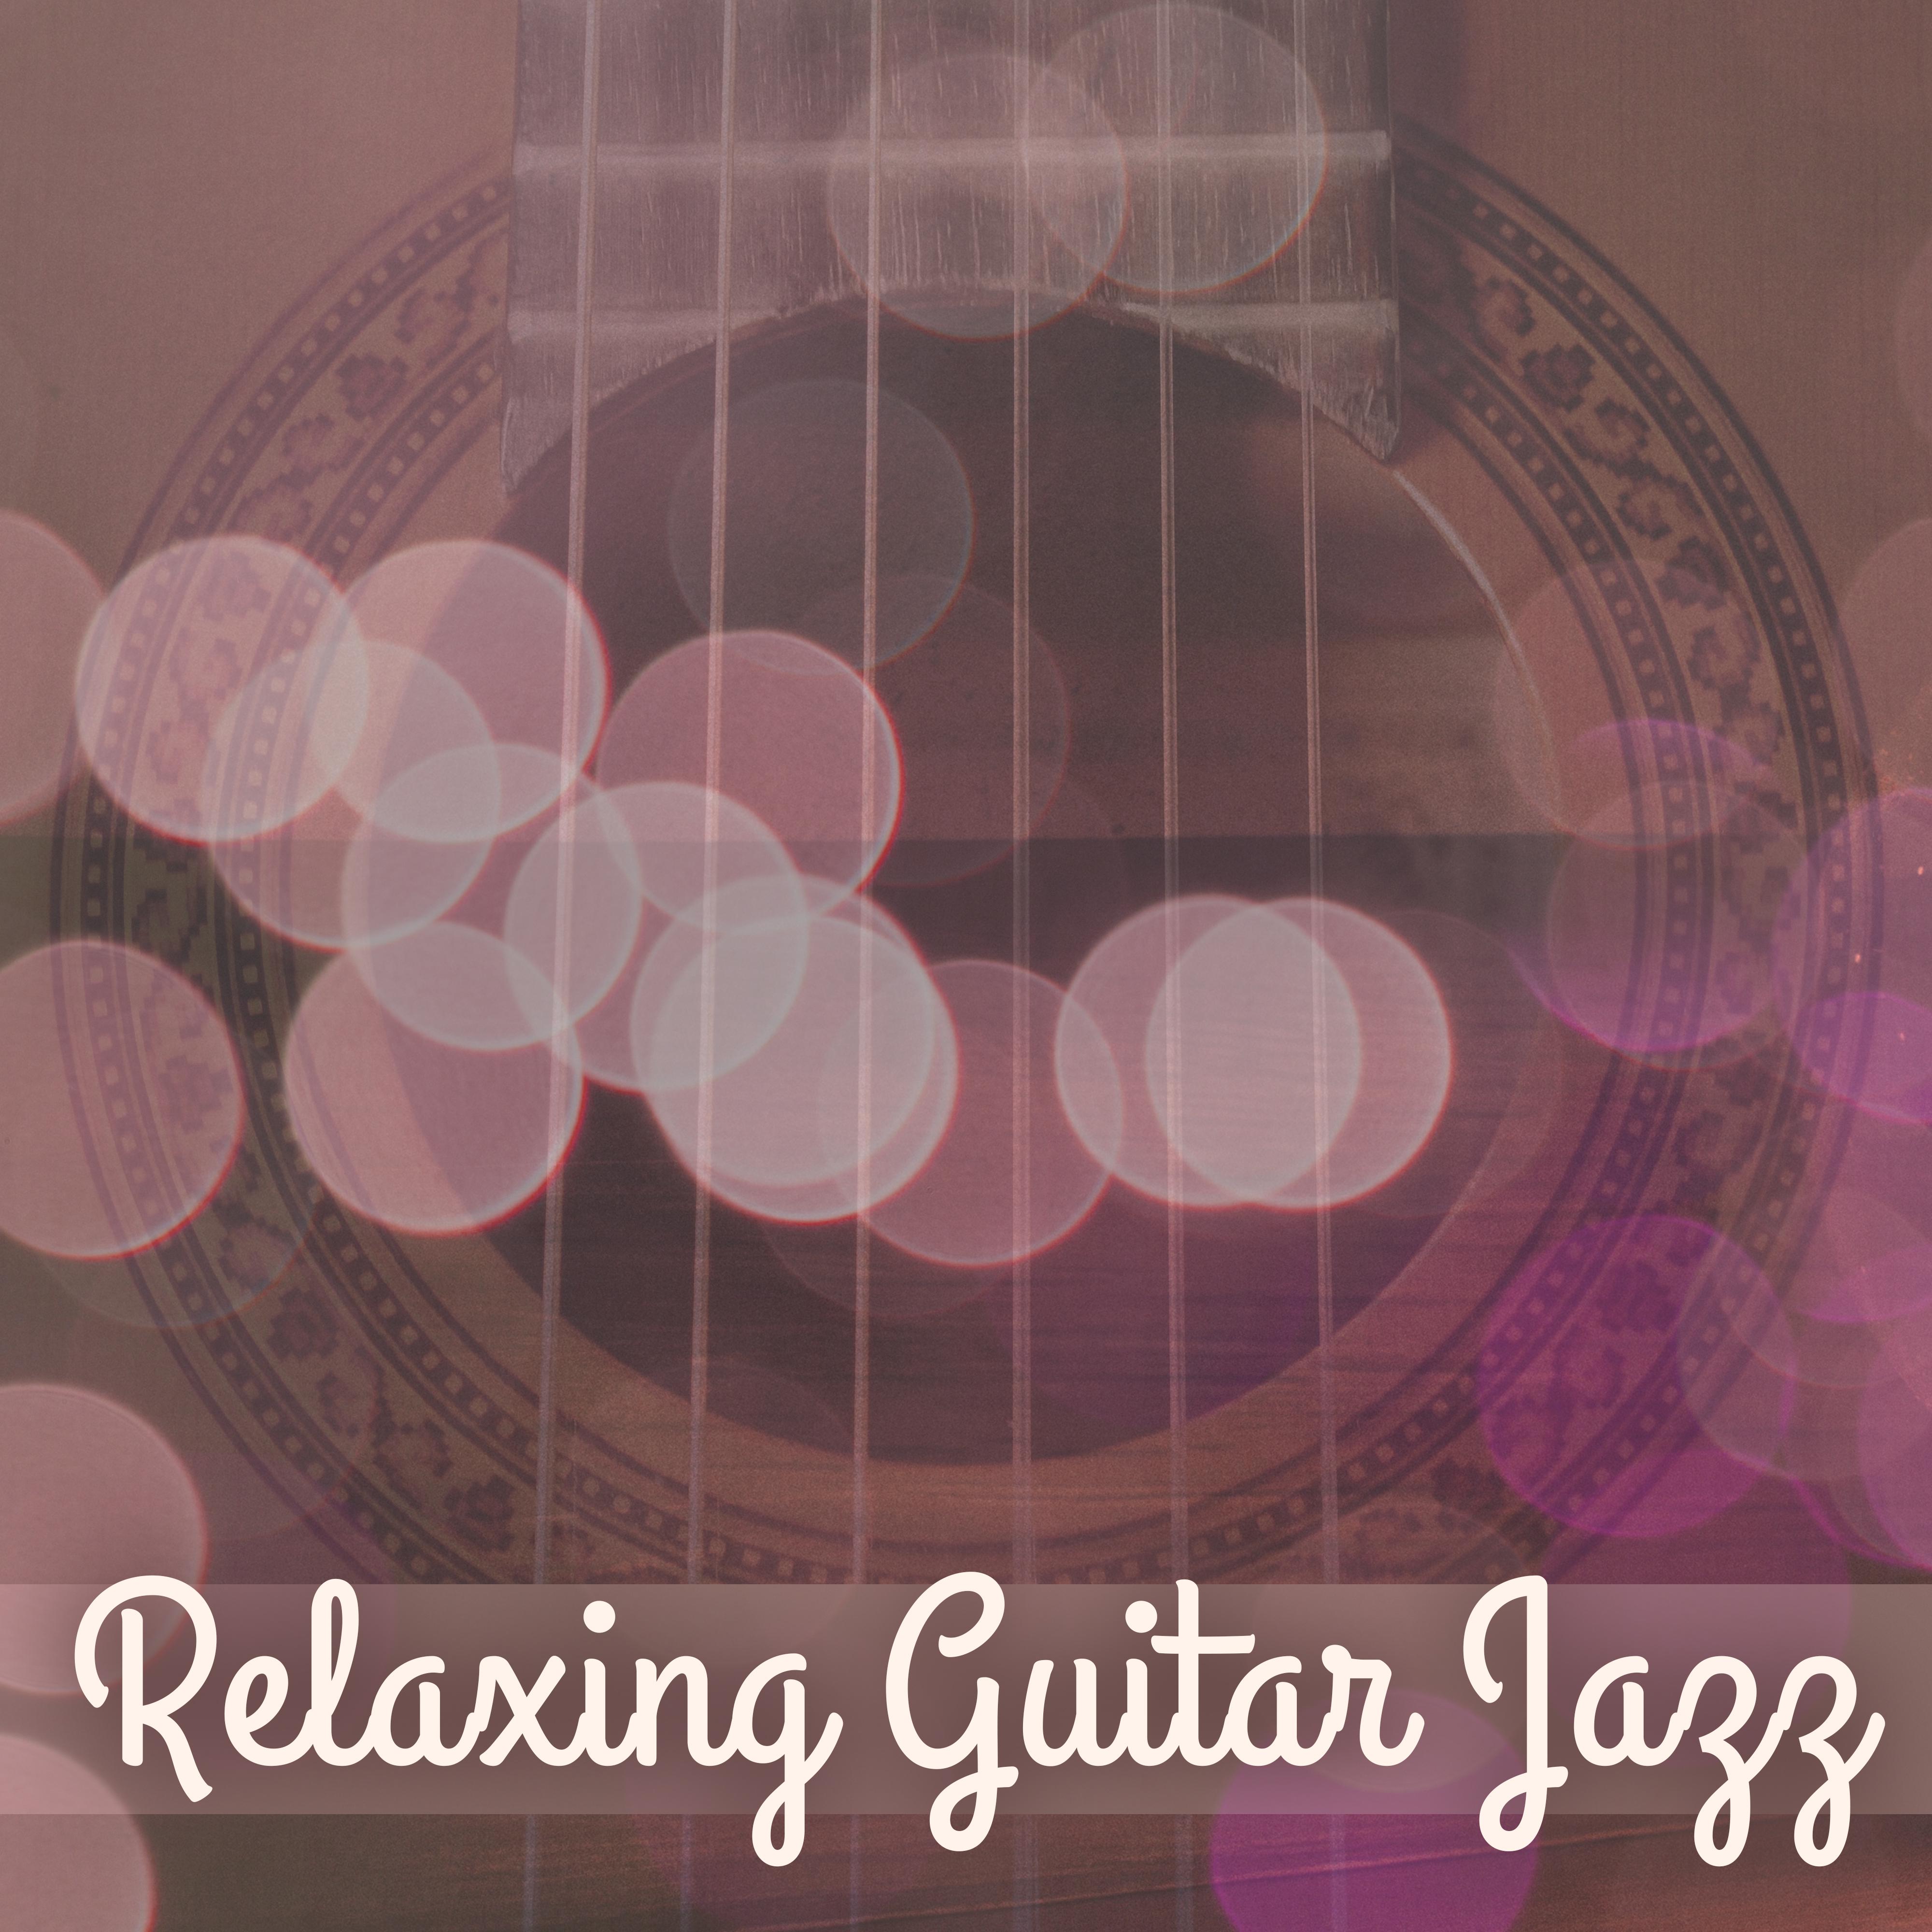 Relaxing Guitar Jazz  Smooth Jazz Music, Stress Relief, Easy Listening, Guitar Relaxation, Lazy Day